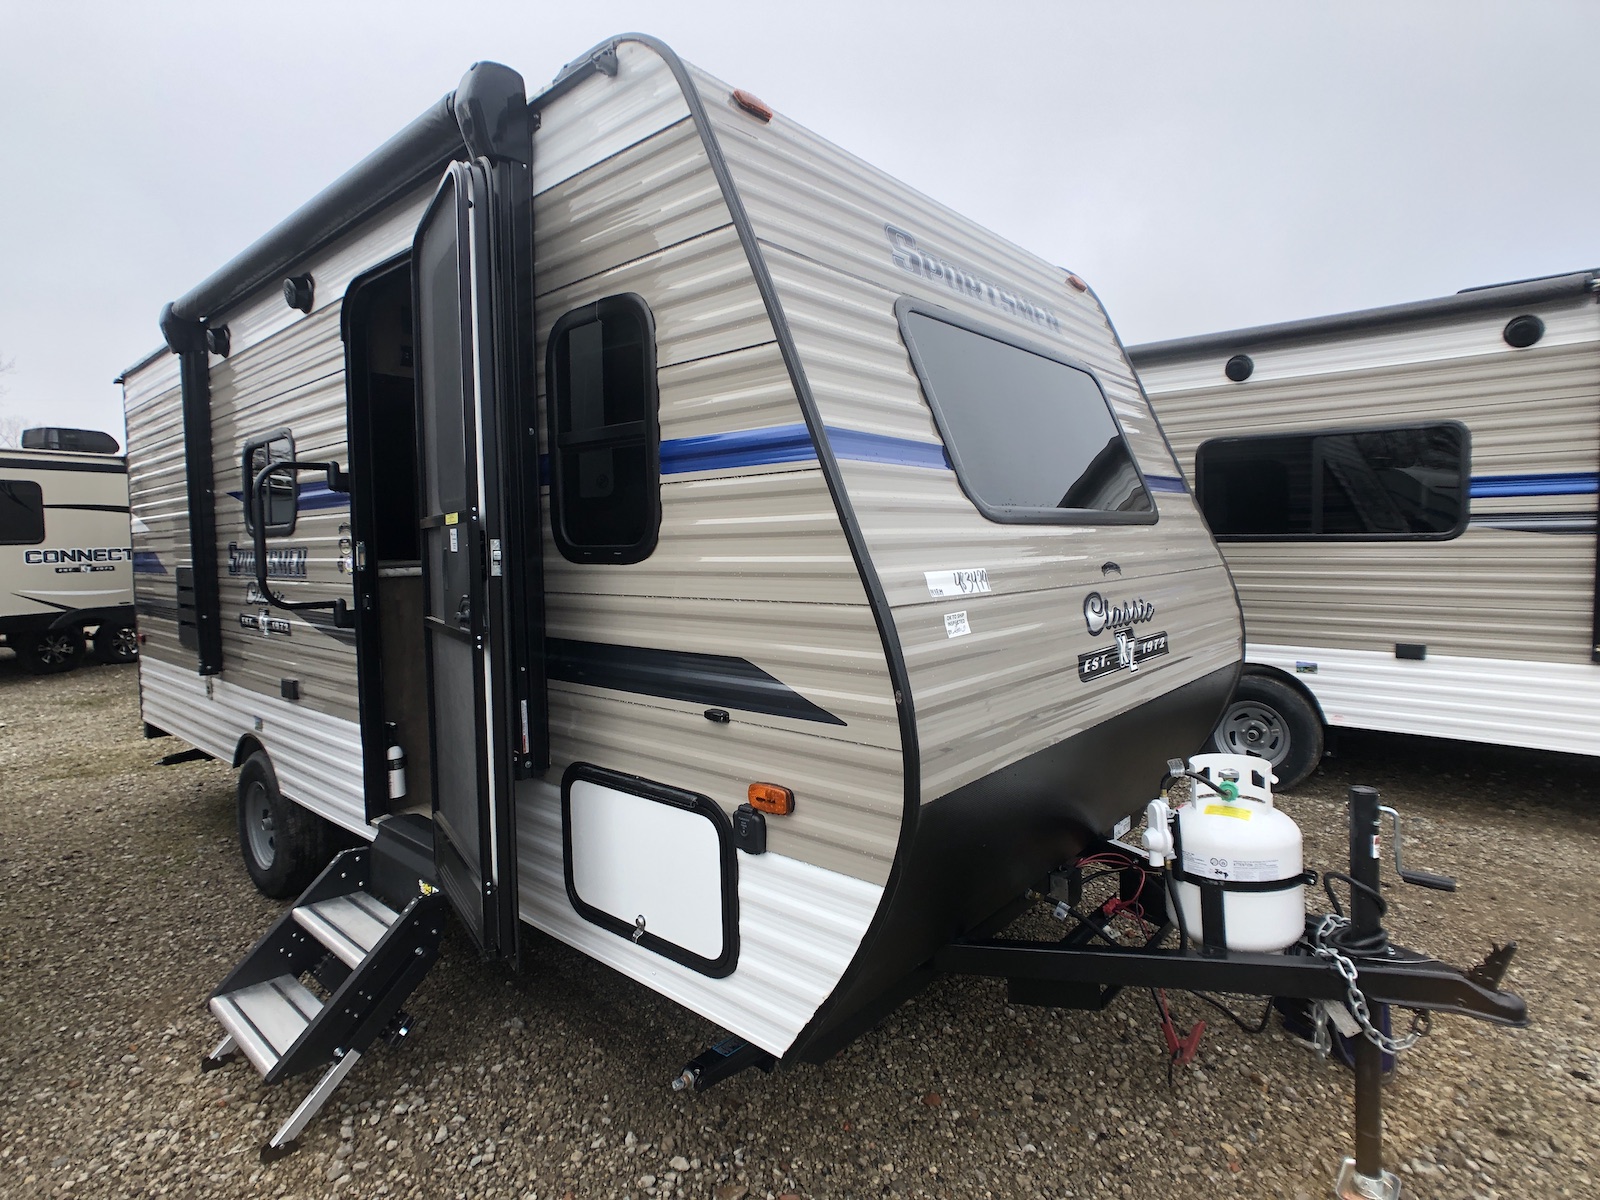 24' travel trailer with bunks